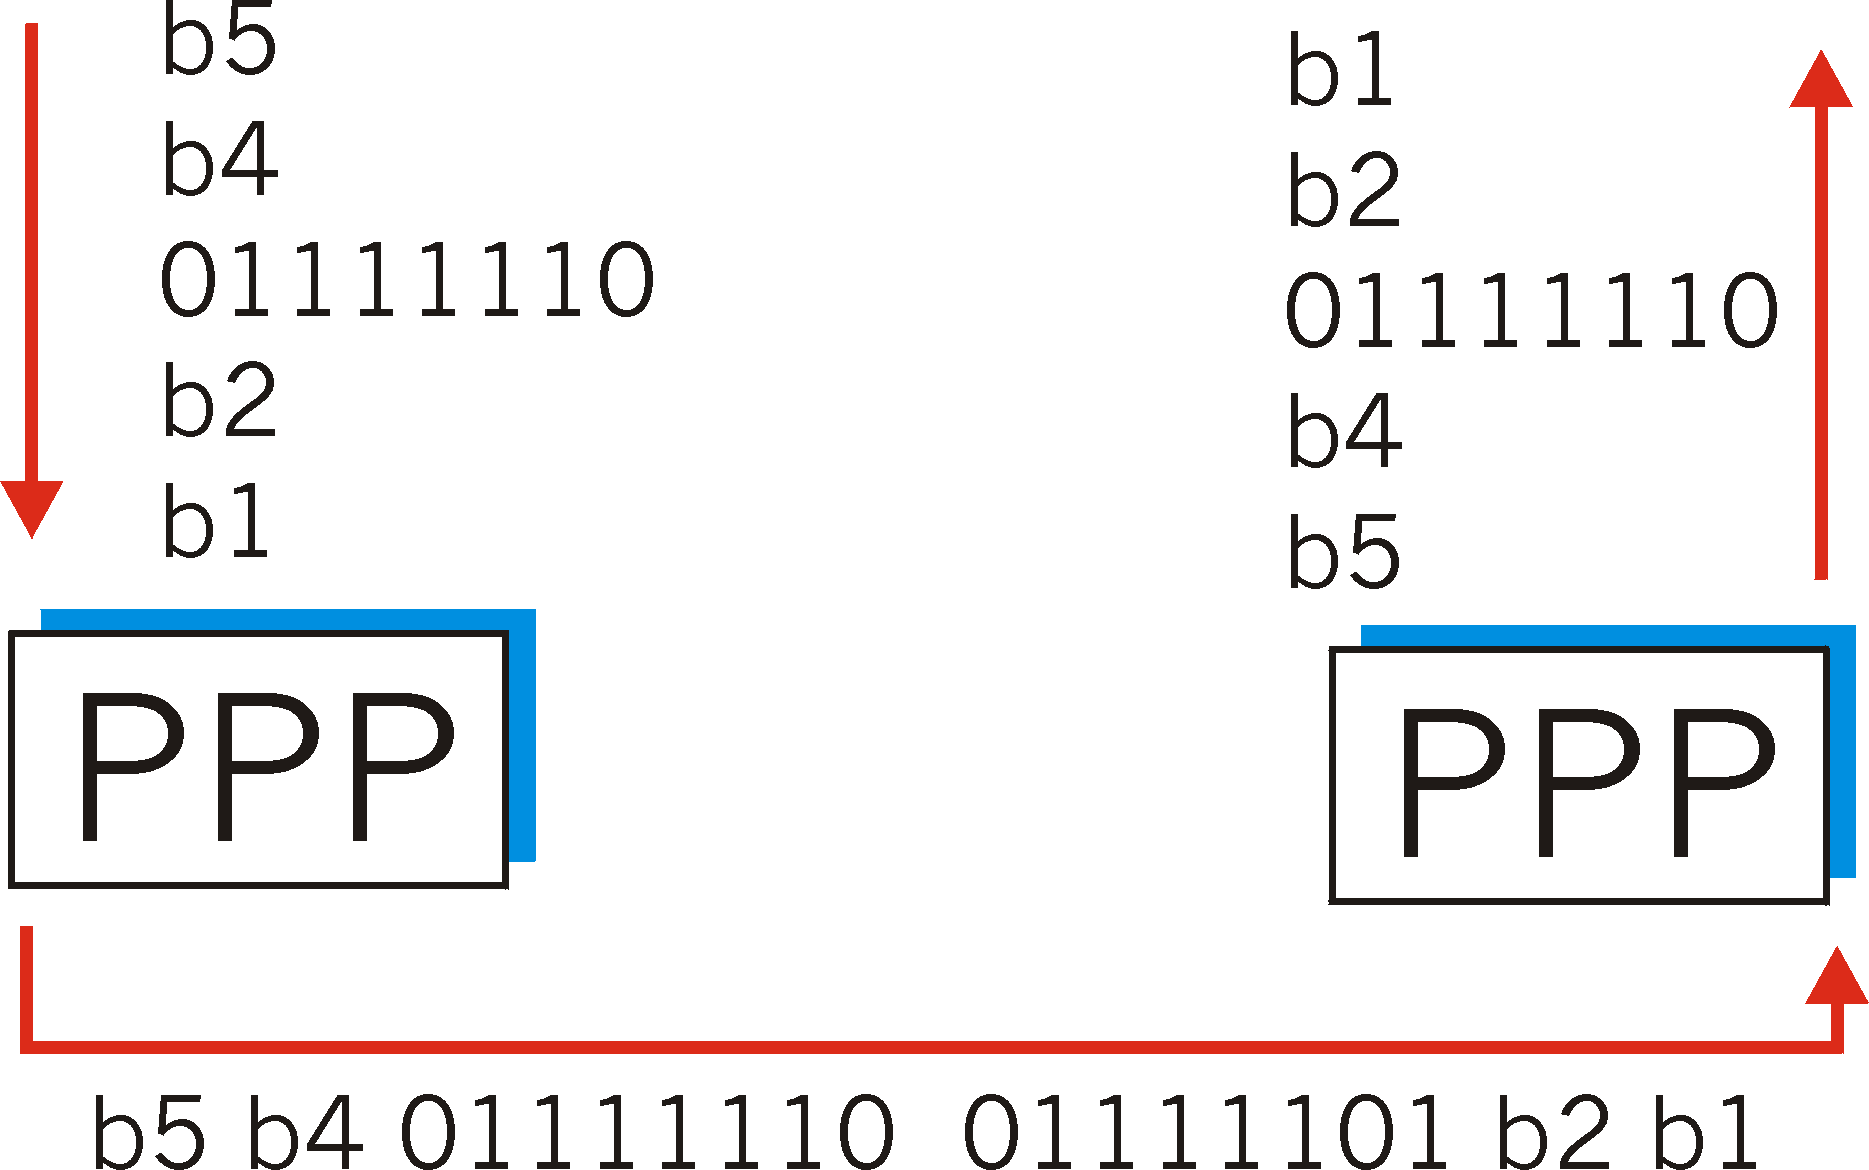 the ppp frame format